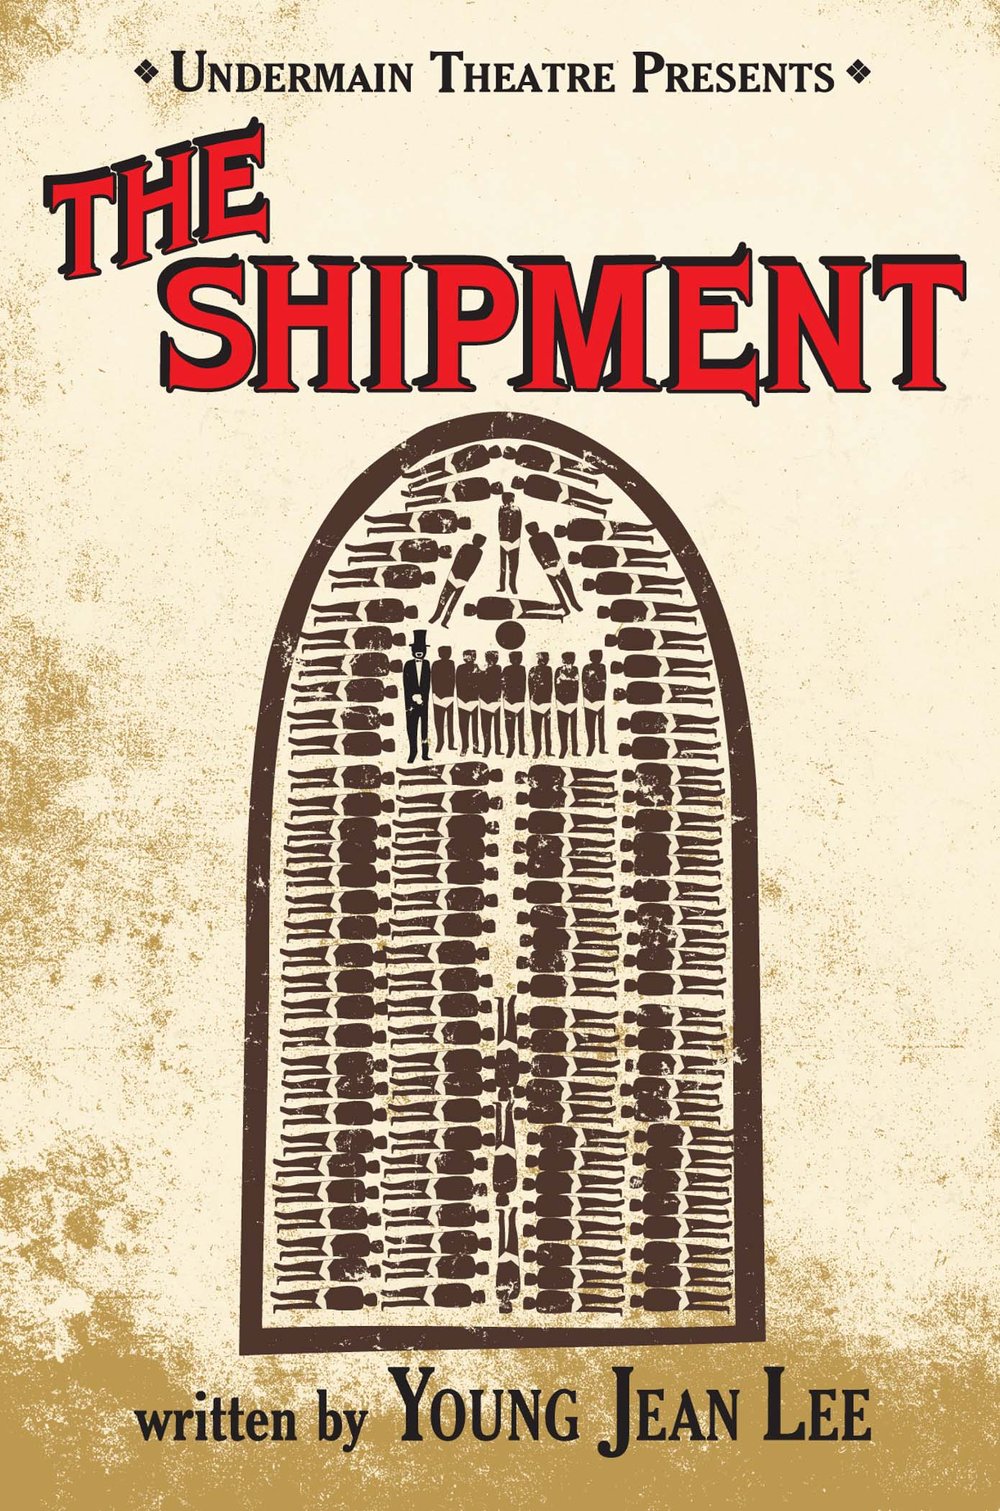 UNDERMAIN THEATRE ARCHIVE: The Shipment by Young Jean Lee, 2011